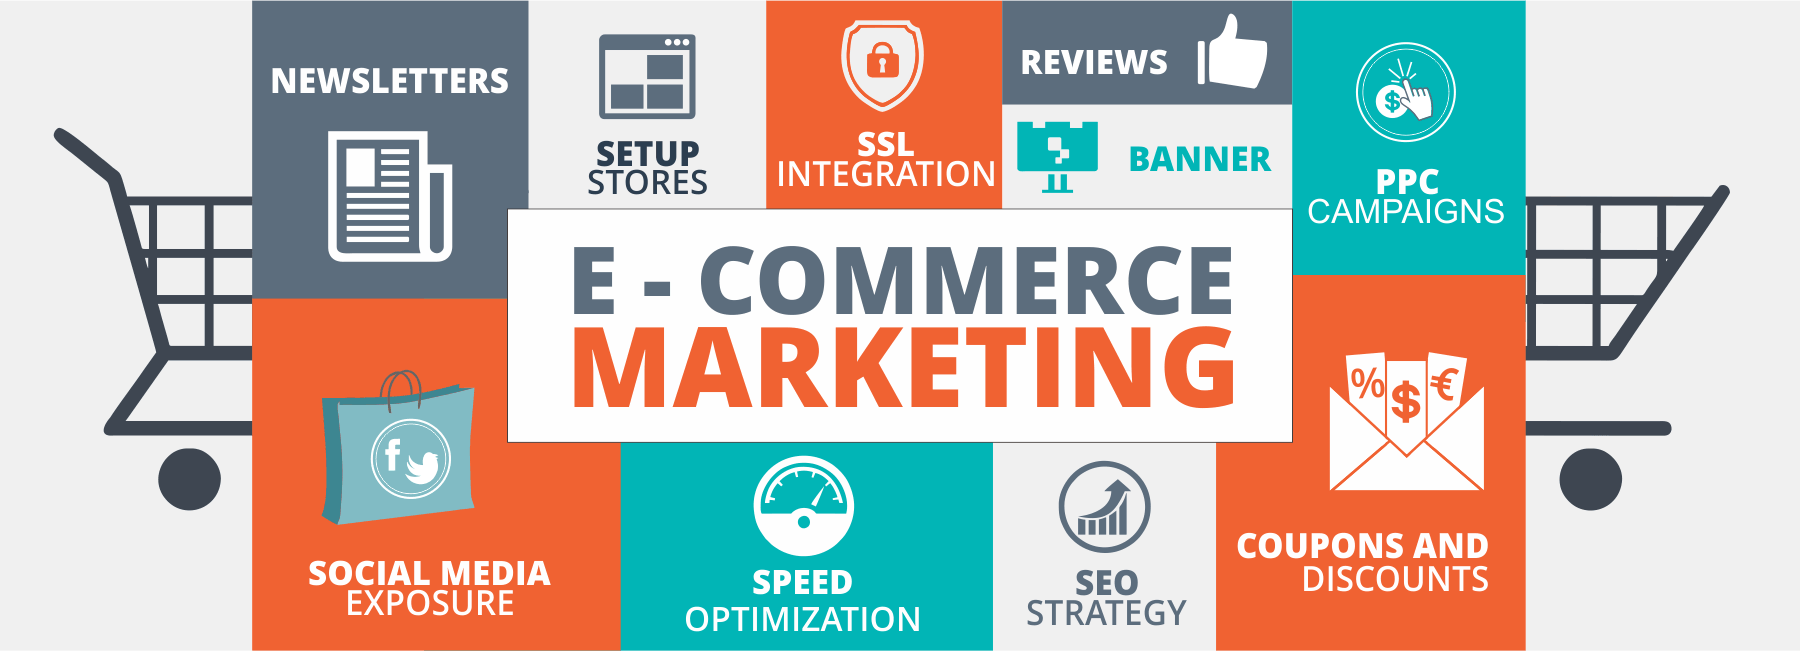 E-Commerce SEO Tips to grow eCommerce Store performance in 